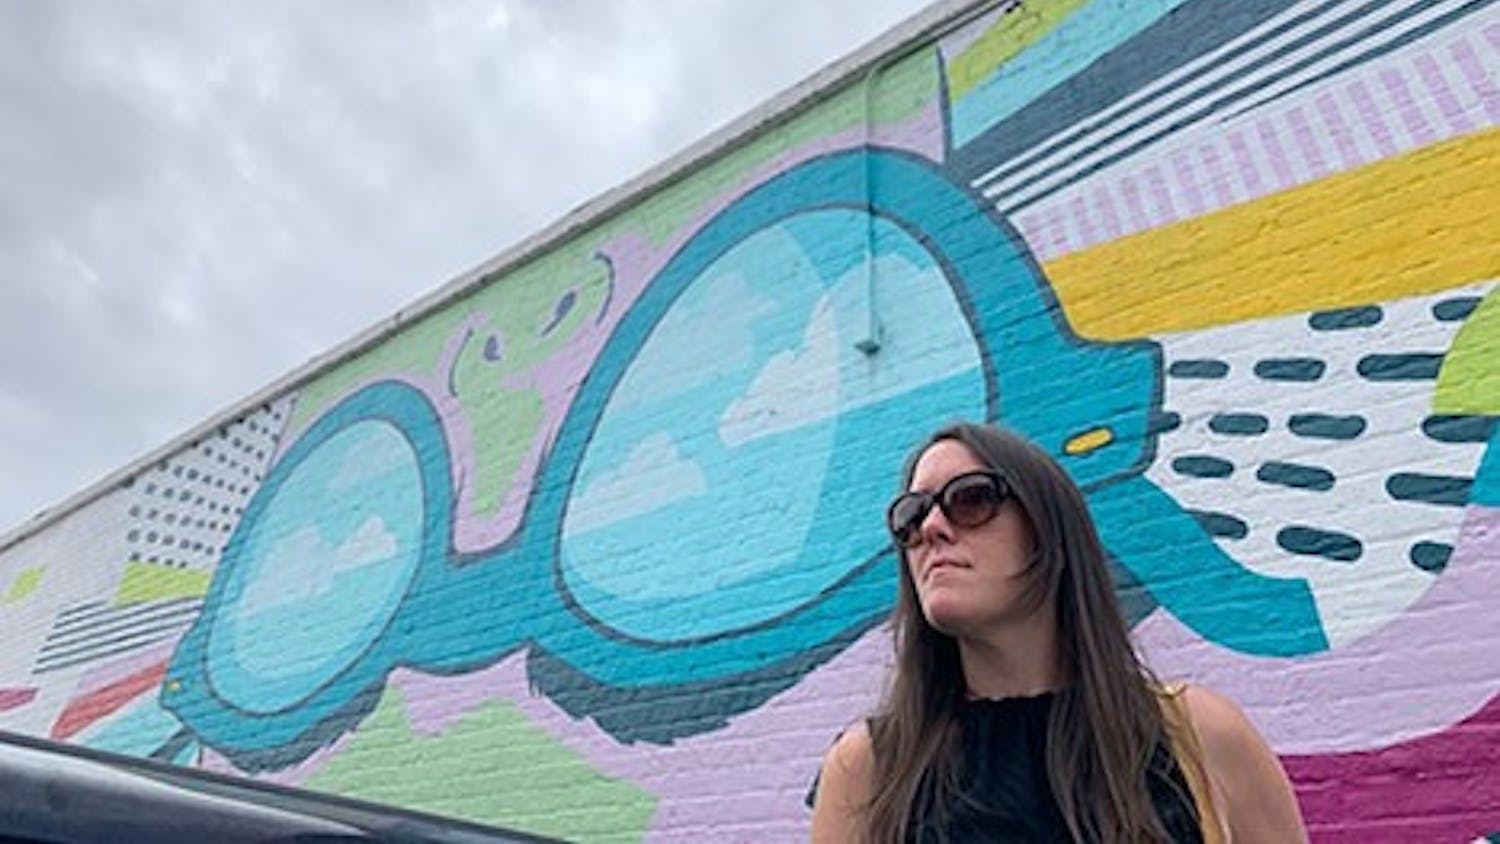 Freelance artist Cait Maloney stands in front of her mural "Lady Vista" located on the wall of Boku Kitchen and Saloon in Columbia, SC.